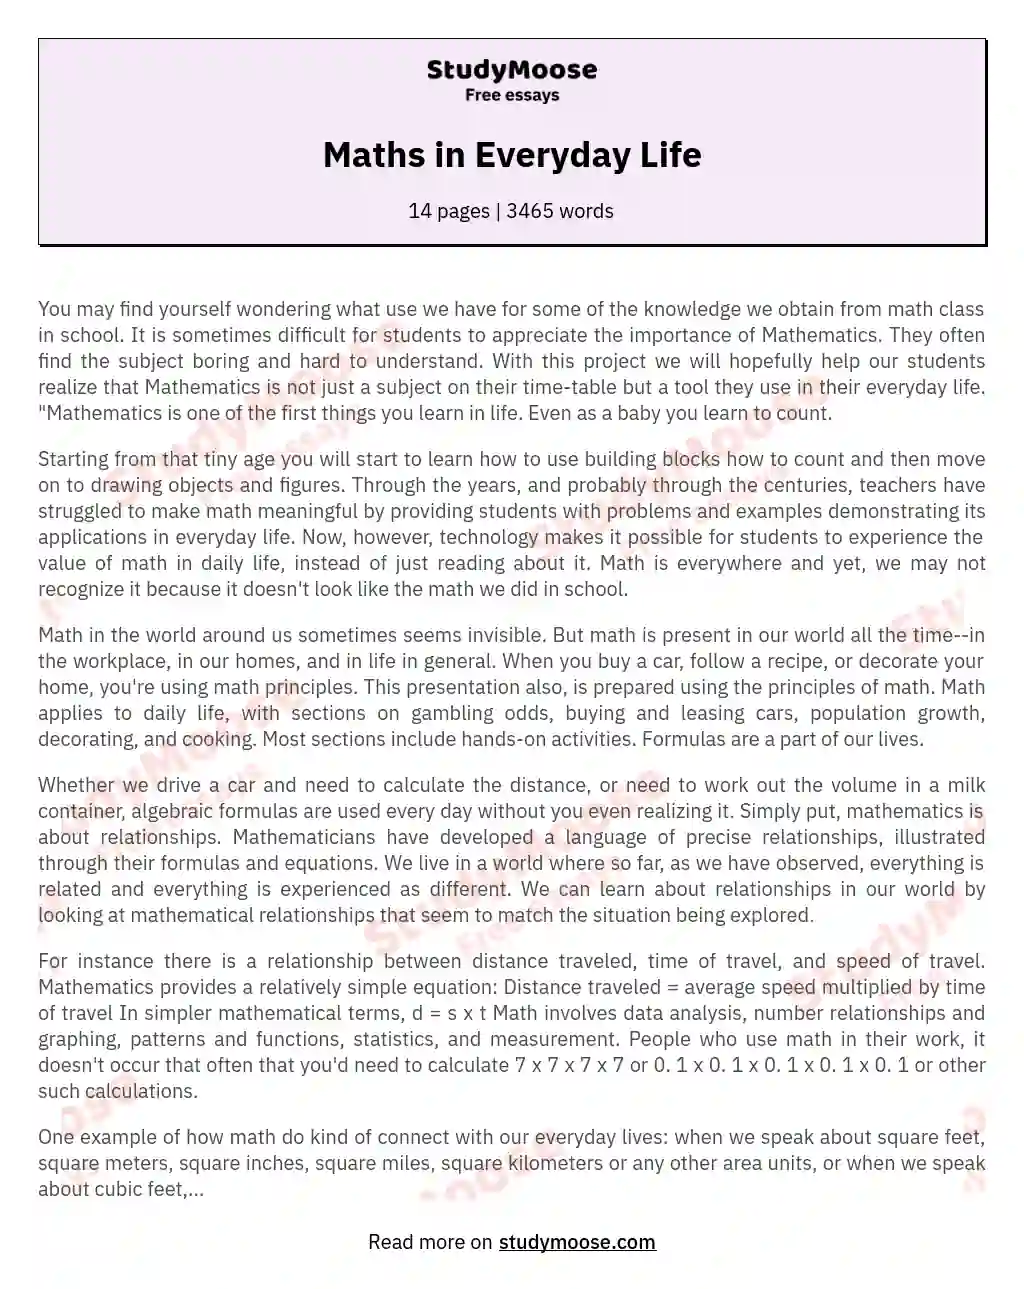 Maths in Everyday Life essay